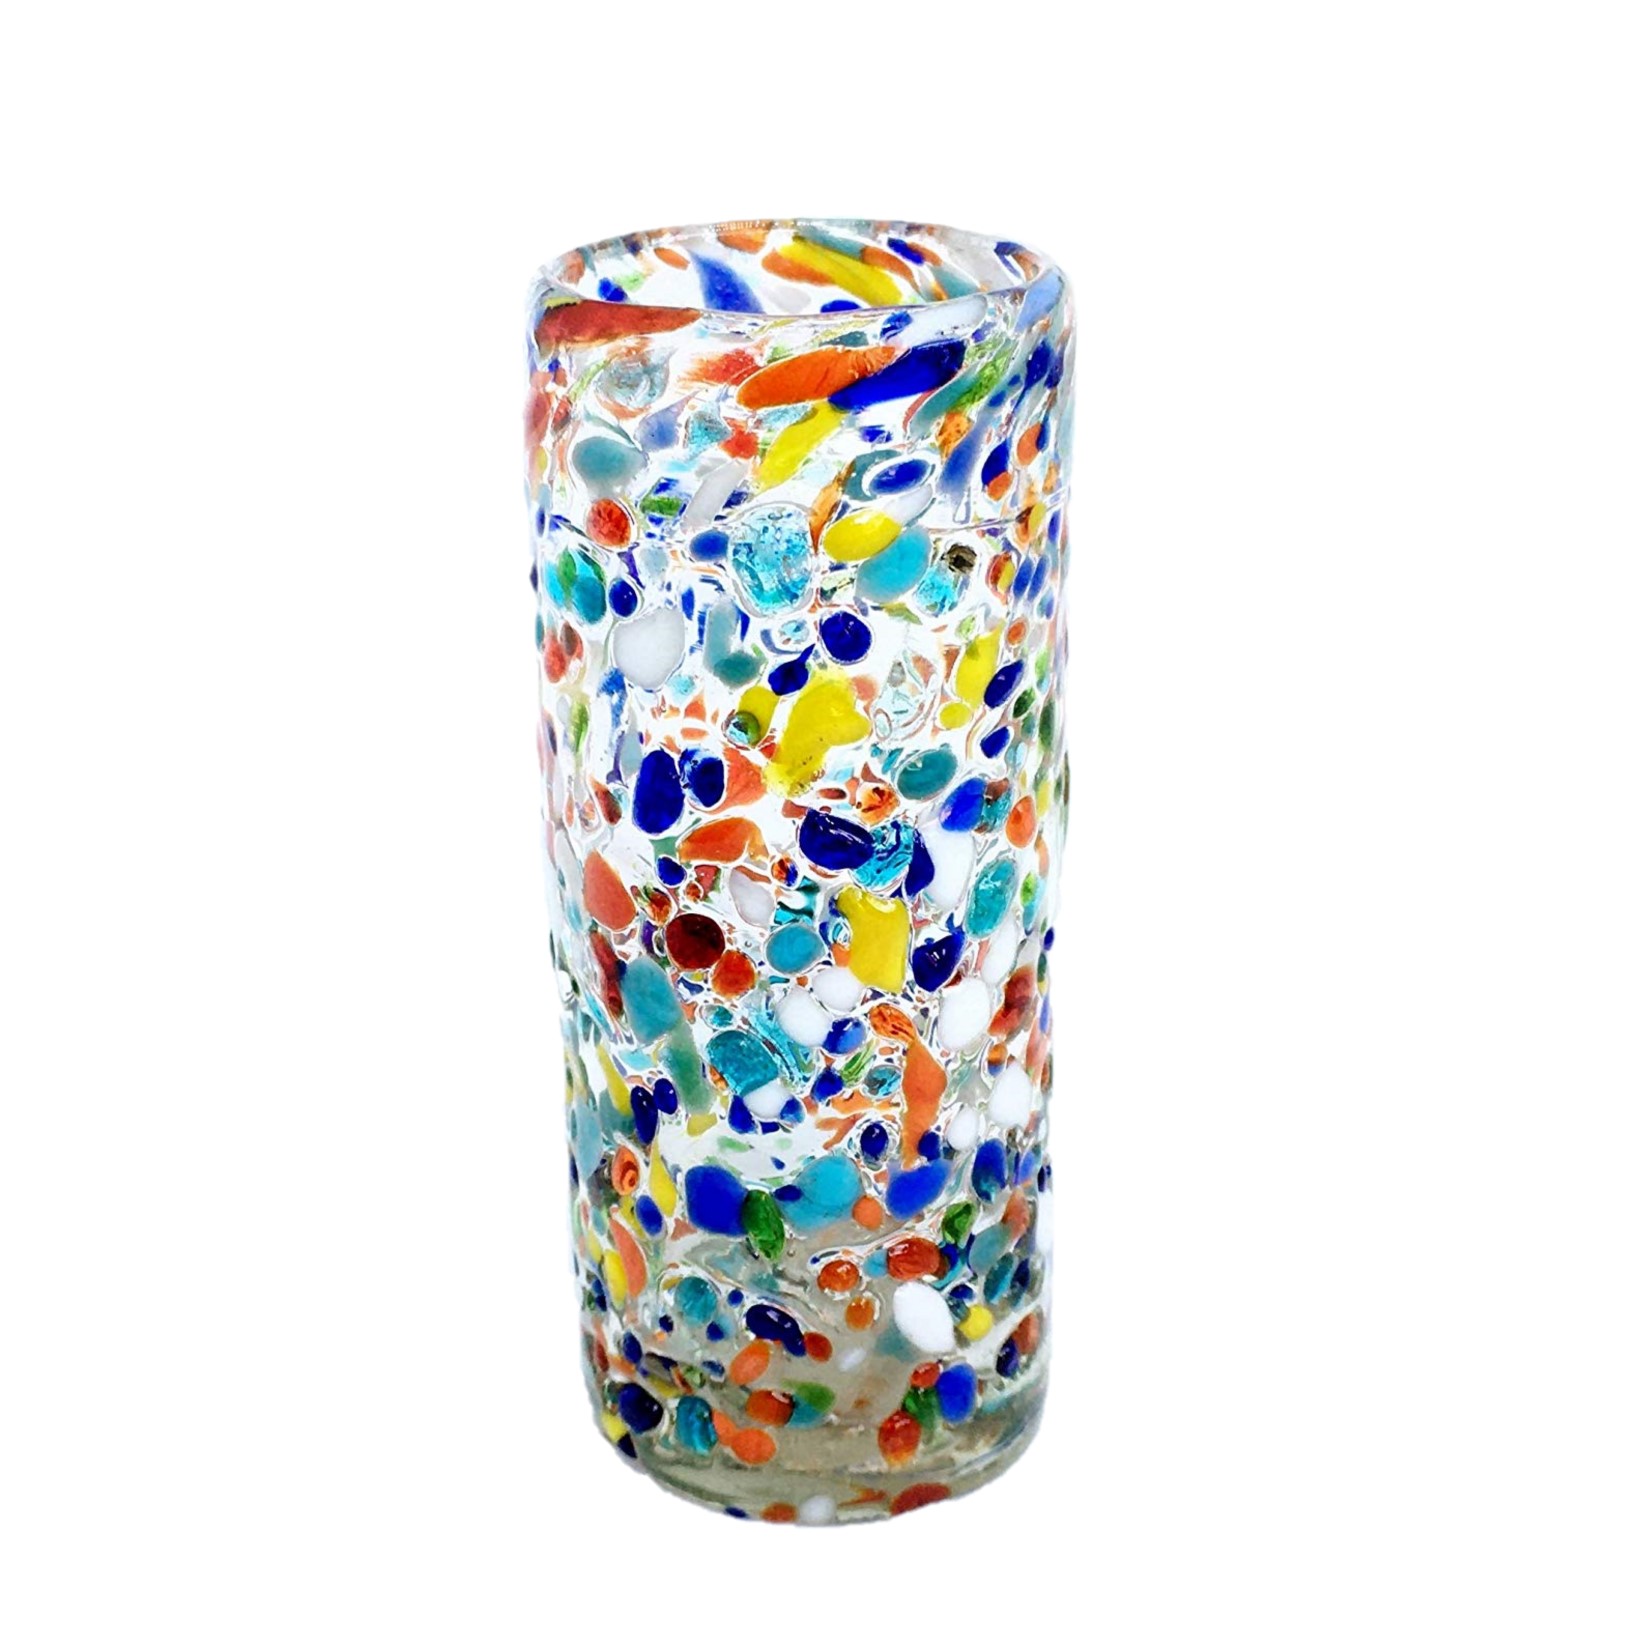 MEXICAN GLASSWARE / Confetti Rocks 2 oz Tequila Shot Glasses (set of 6) / Sip your favorite Tequila or Mezcal with these iconic Confetti Rocks shot glasses, which are a must-have of any bar. Crafted one by one by skilled artisans in Tonala, Mexico, each glass is different from the next making them unique works of art. They feature our colorful Confetti rocks design with small colored-glass rounded cristals embedded in clear glass that give them a nice feeling and grip. These shot glasses are festive and fun, making them a perfect gift for anyone. Get ready for your next fiesta!!